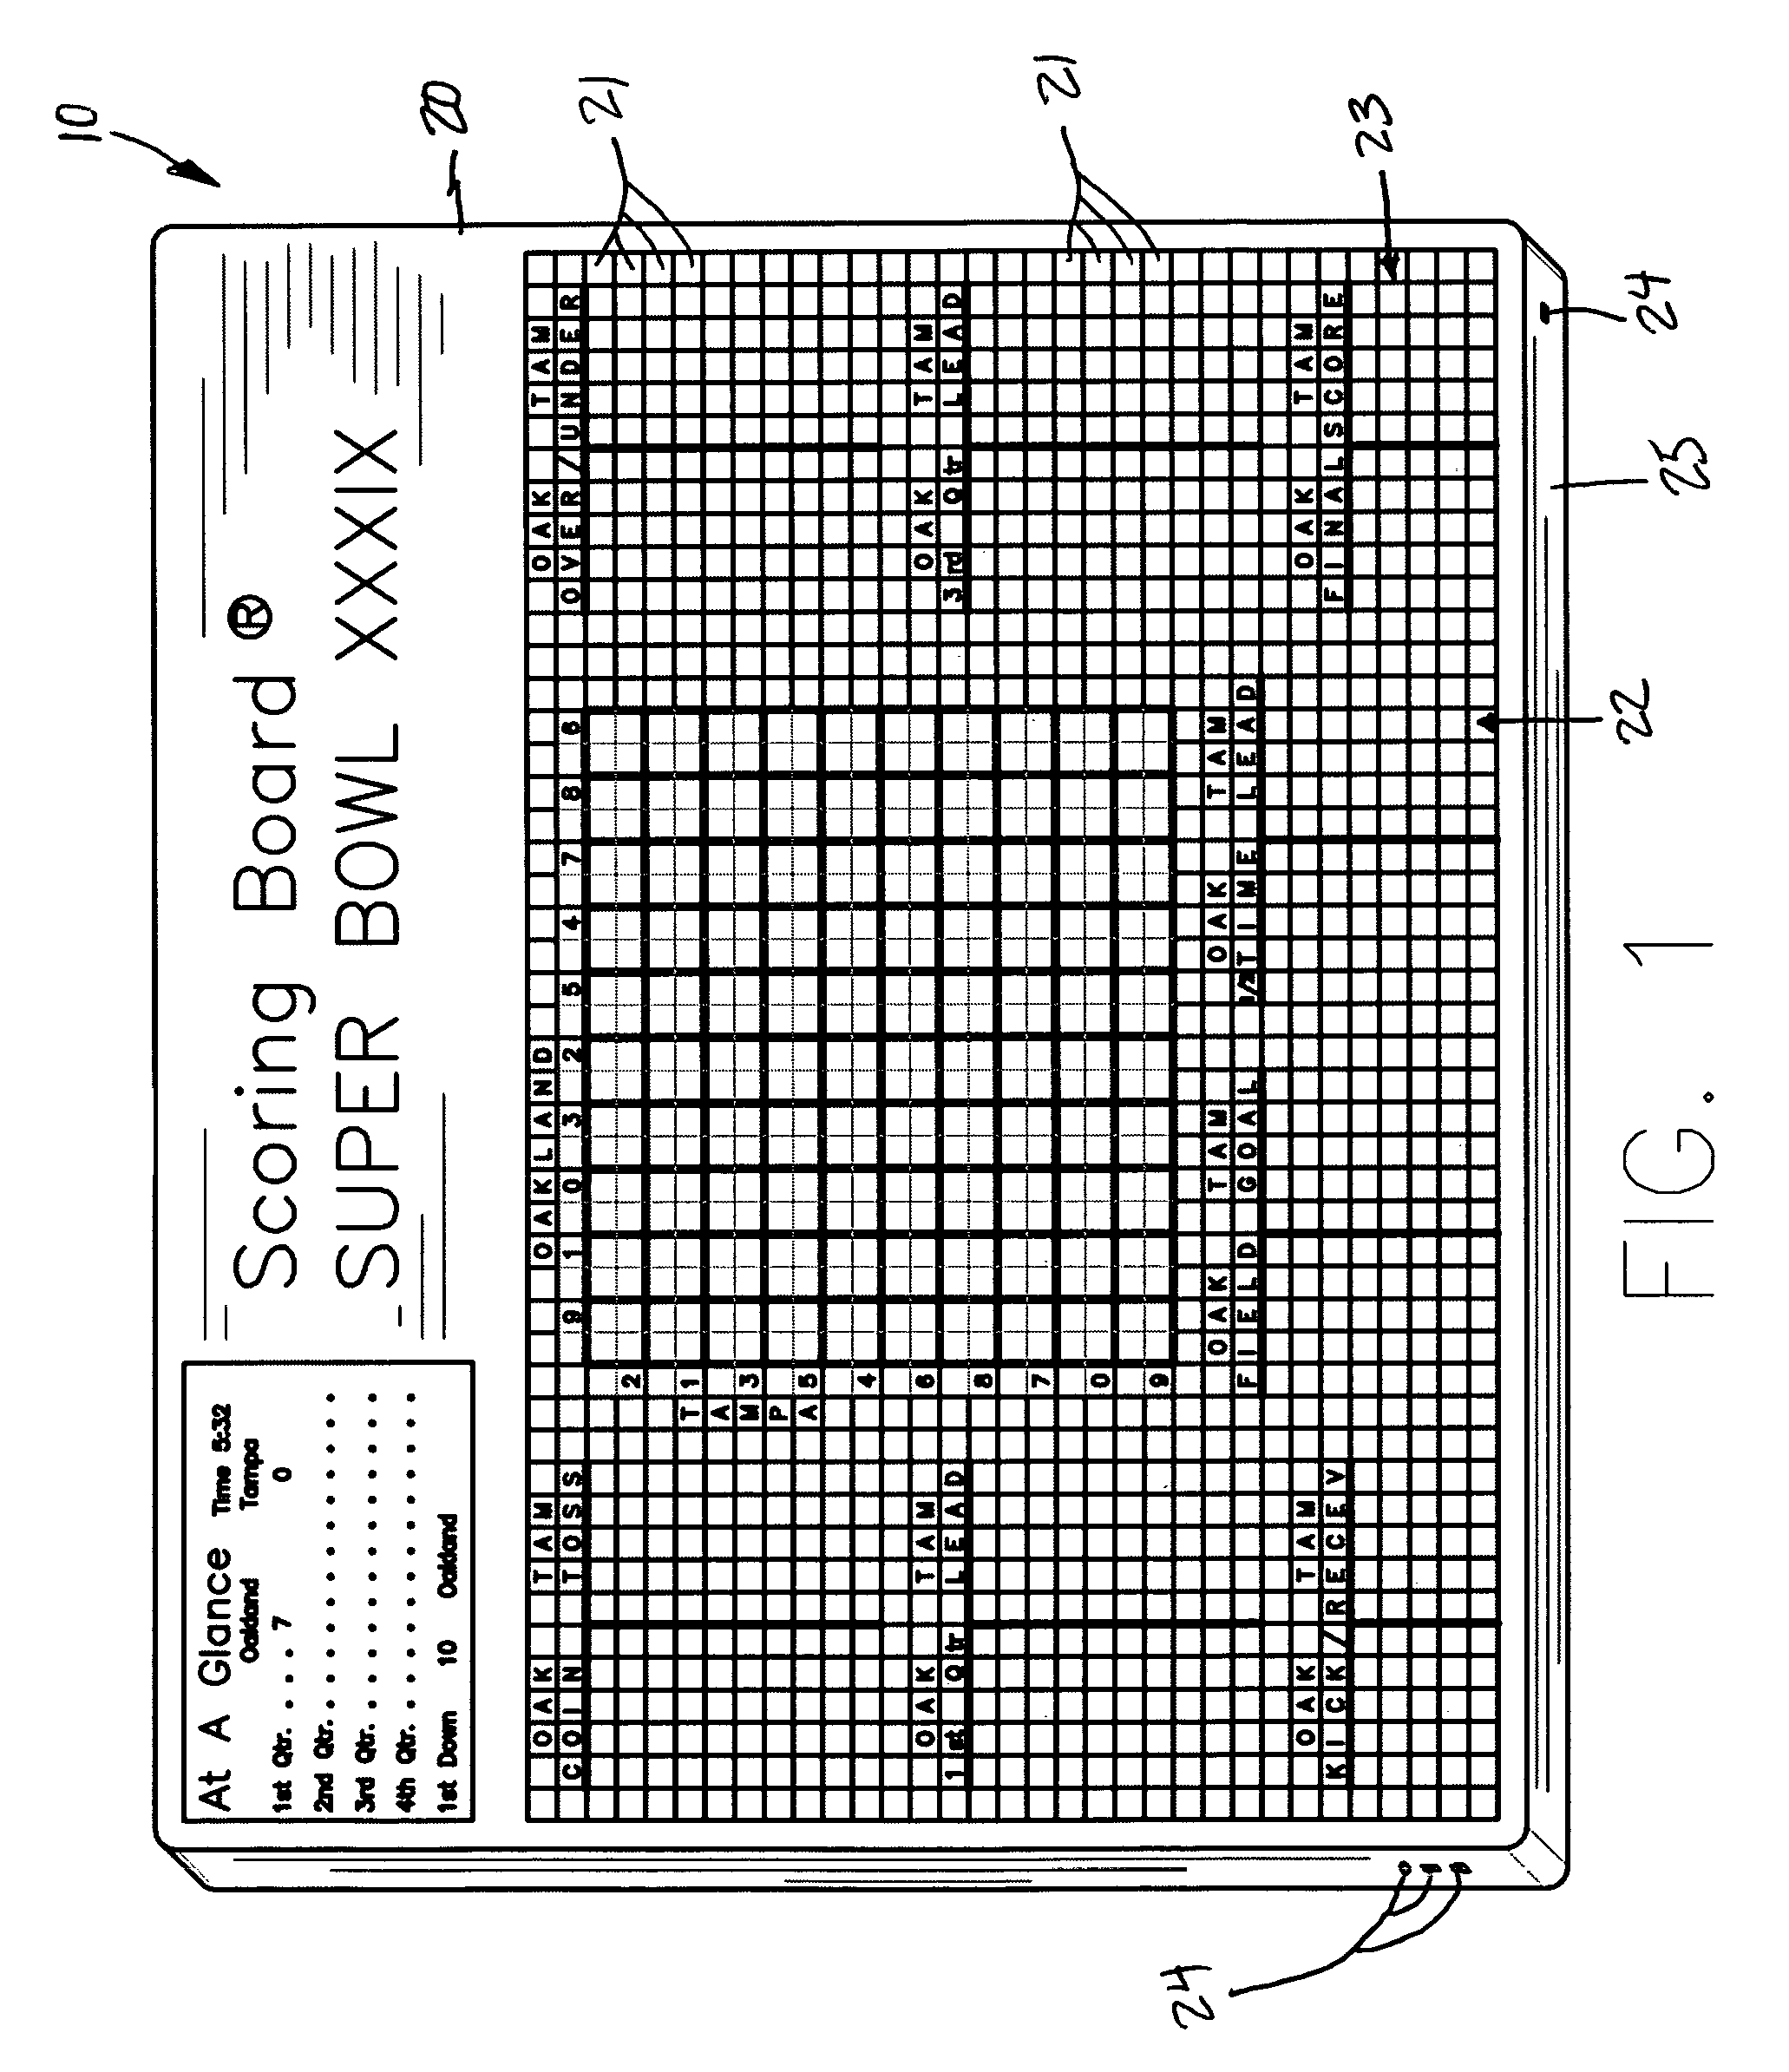 System and method for keeping track of real-time data pertaining to scores and wagering information of sporting activities